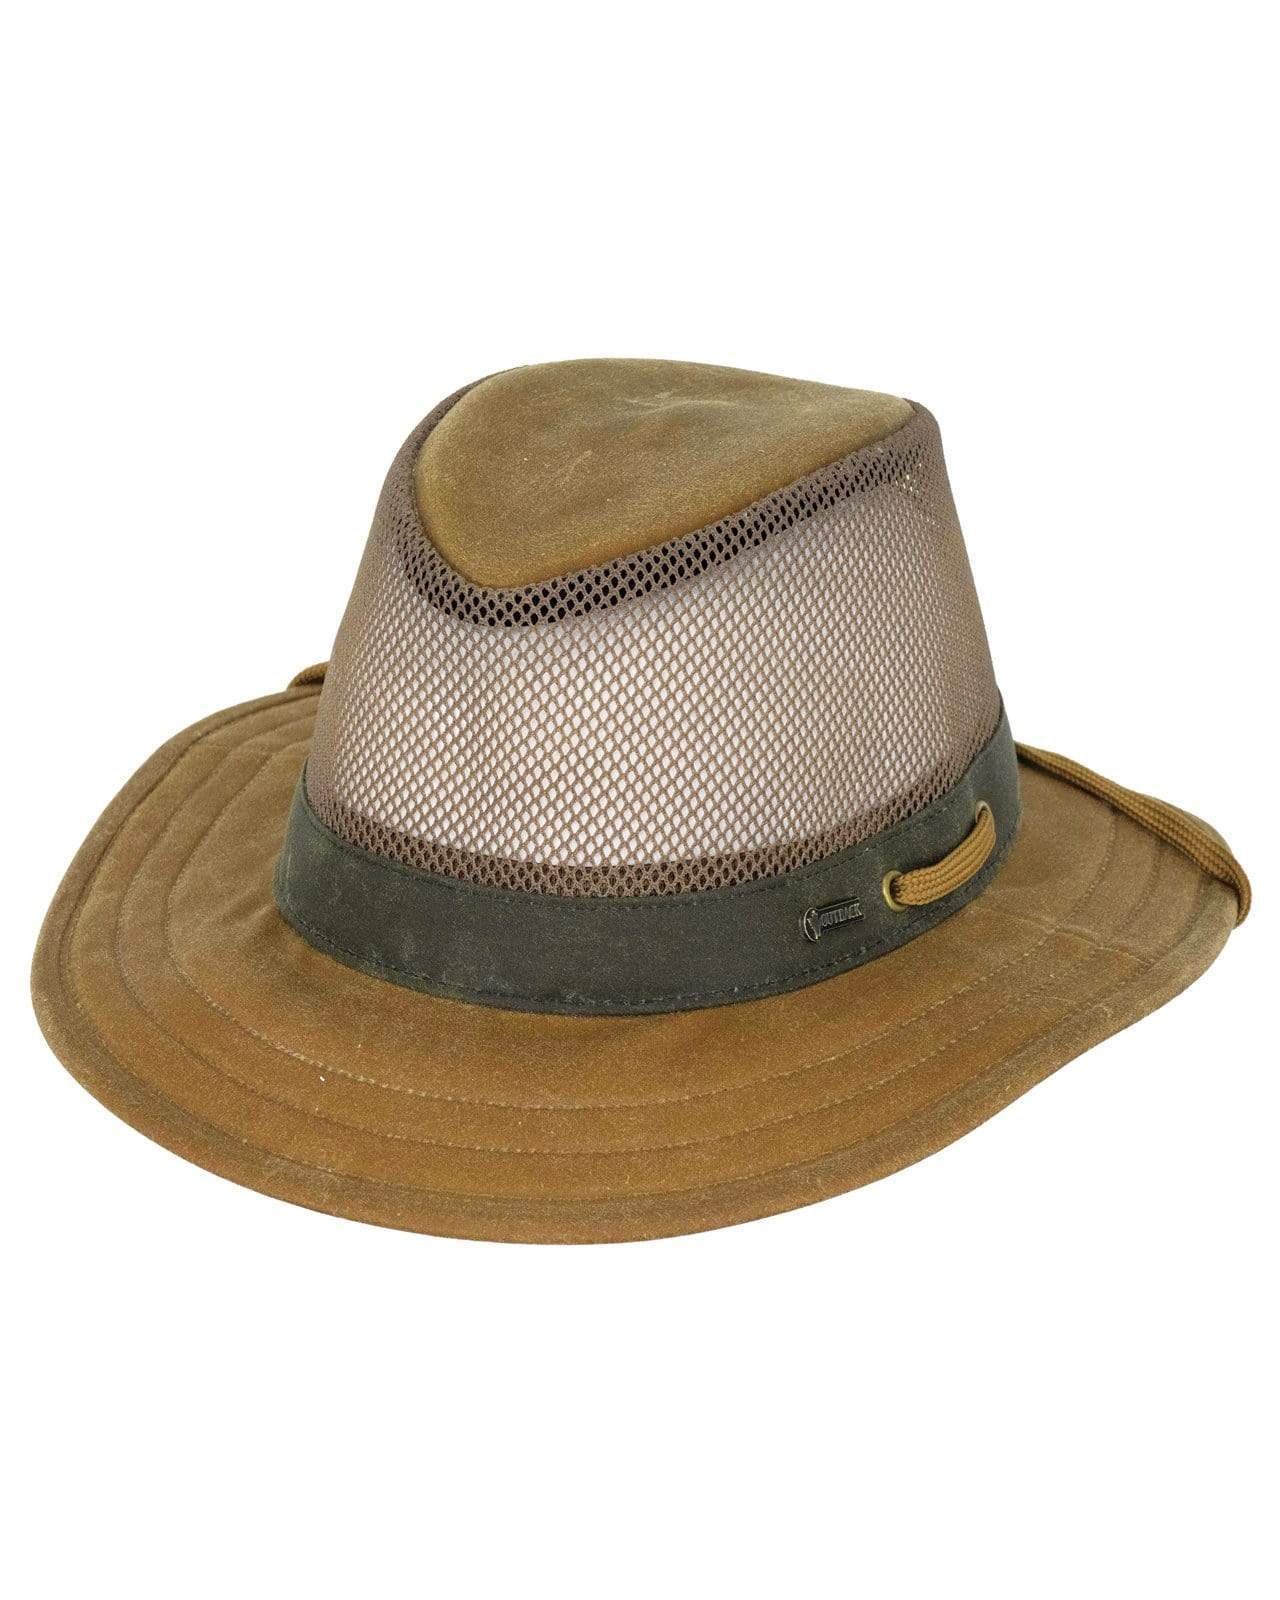 Willis with Mesh | Oilskin Hats by Outback Trading Company 